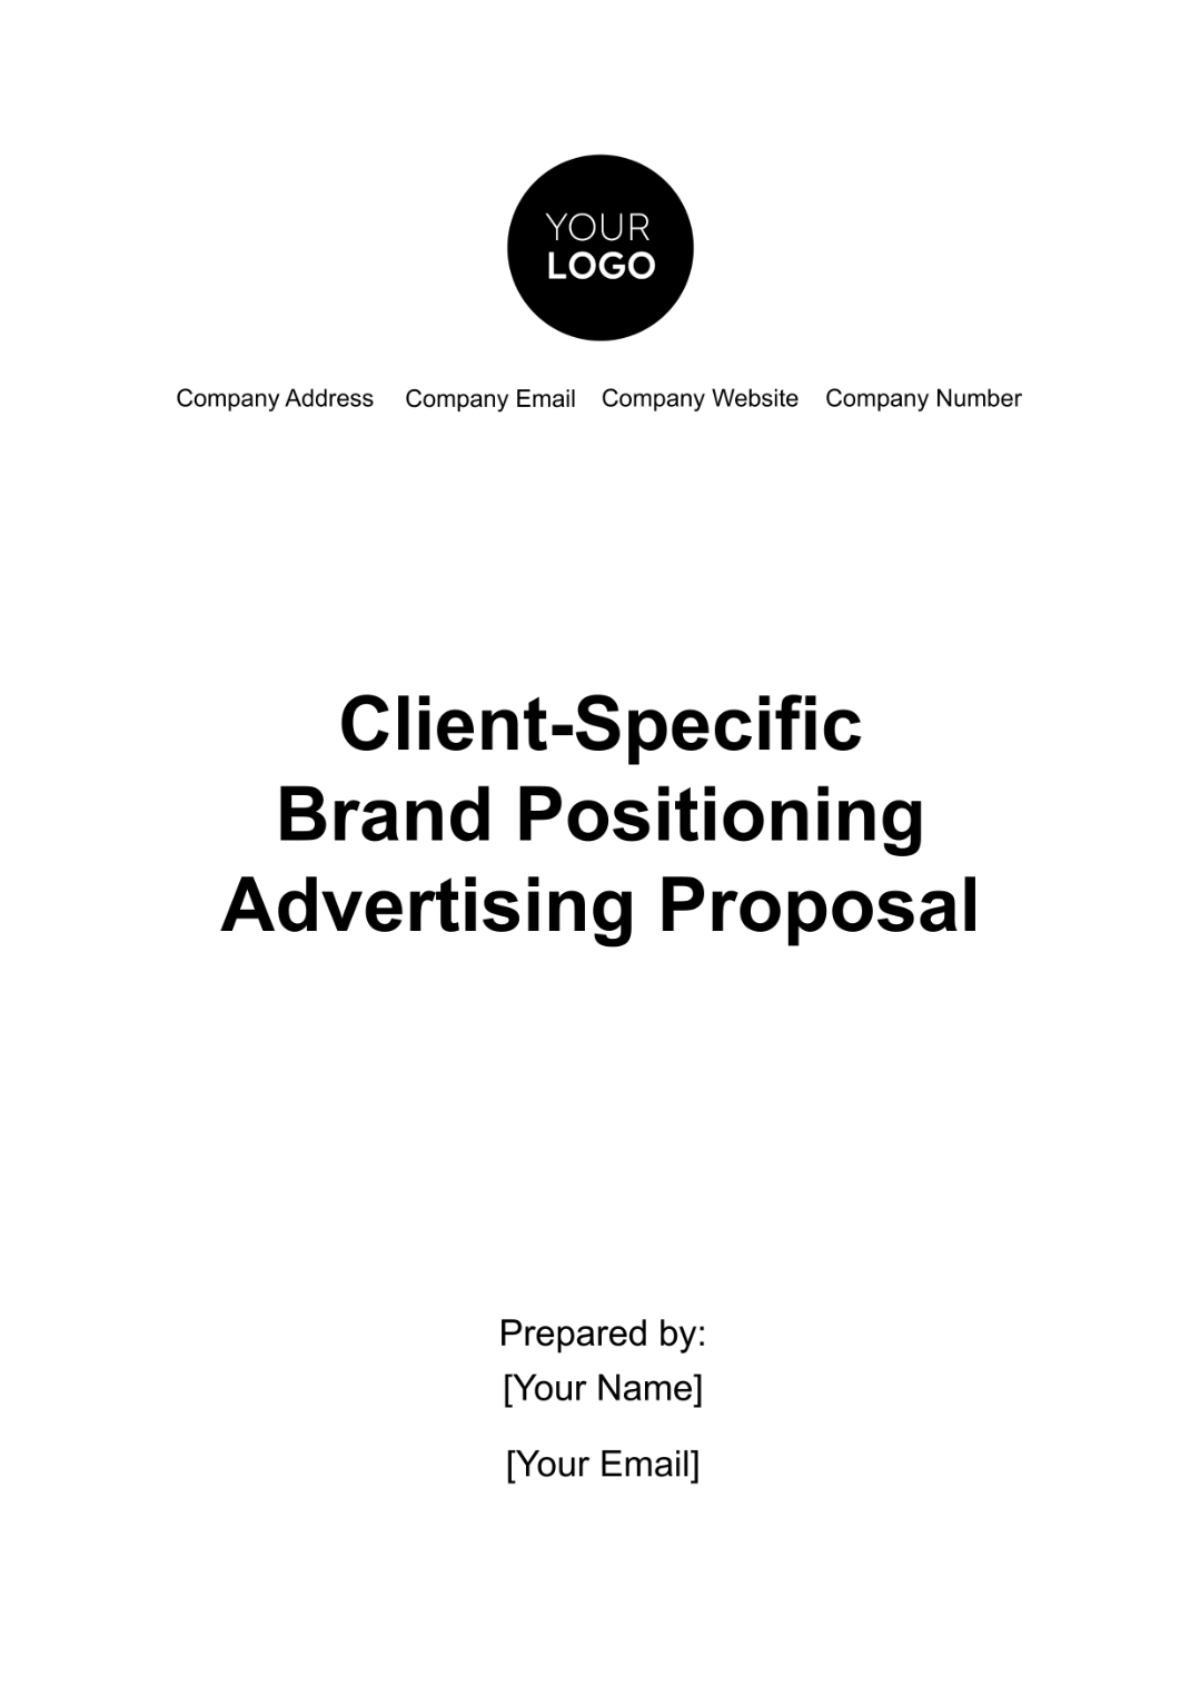 Free Client-Specific Brand Positioning Advertising Proposal Template